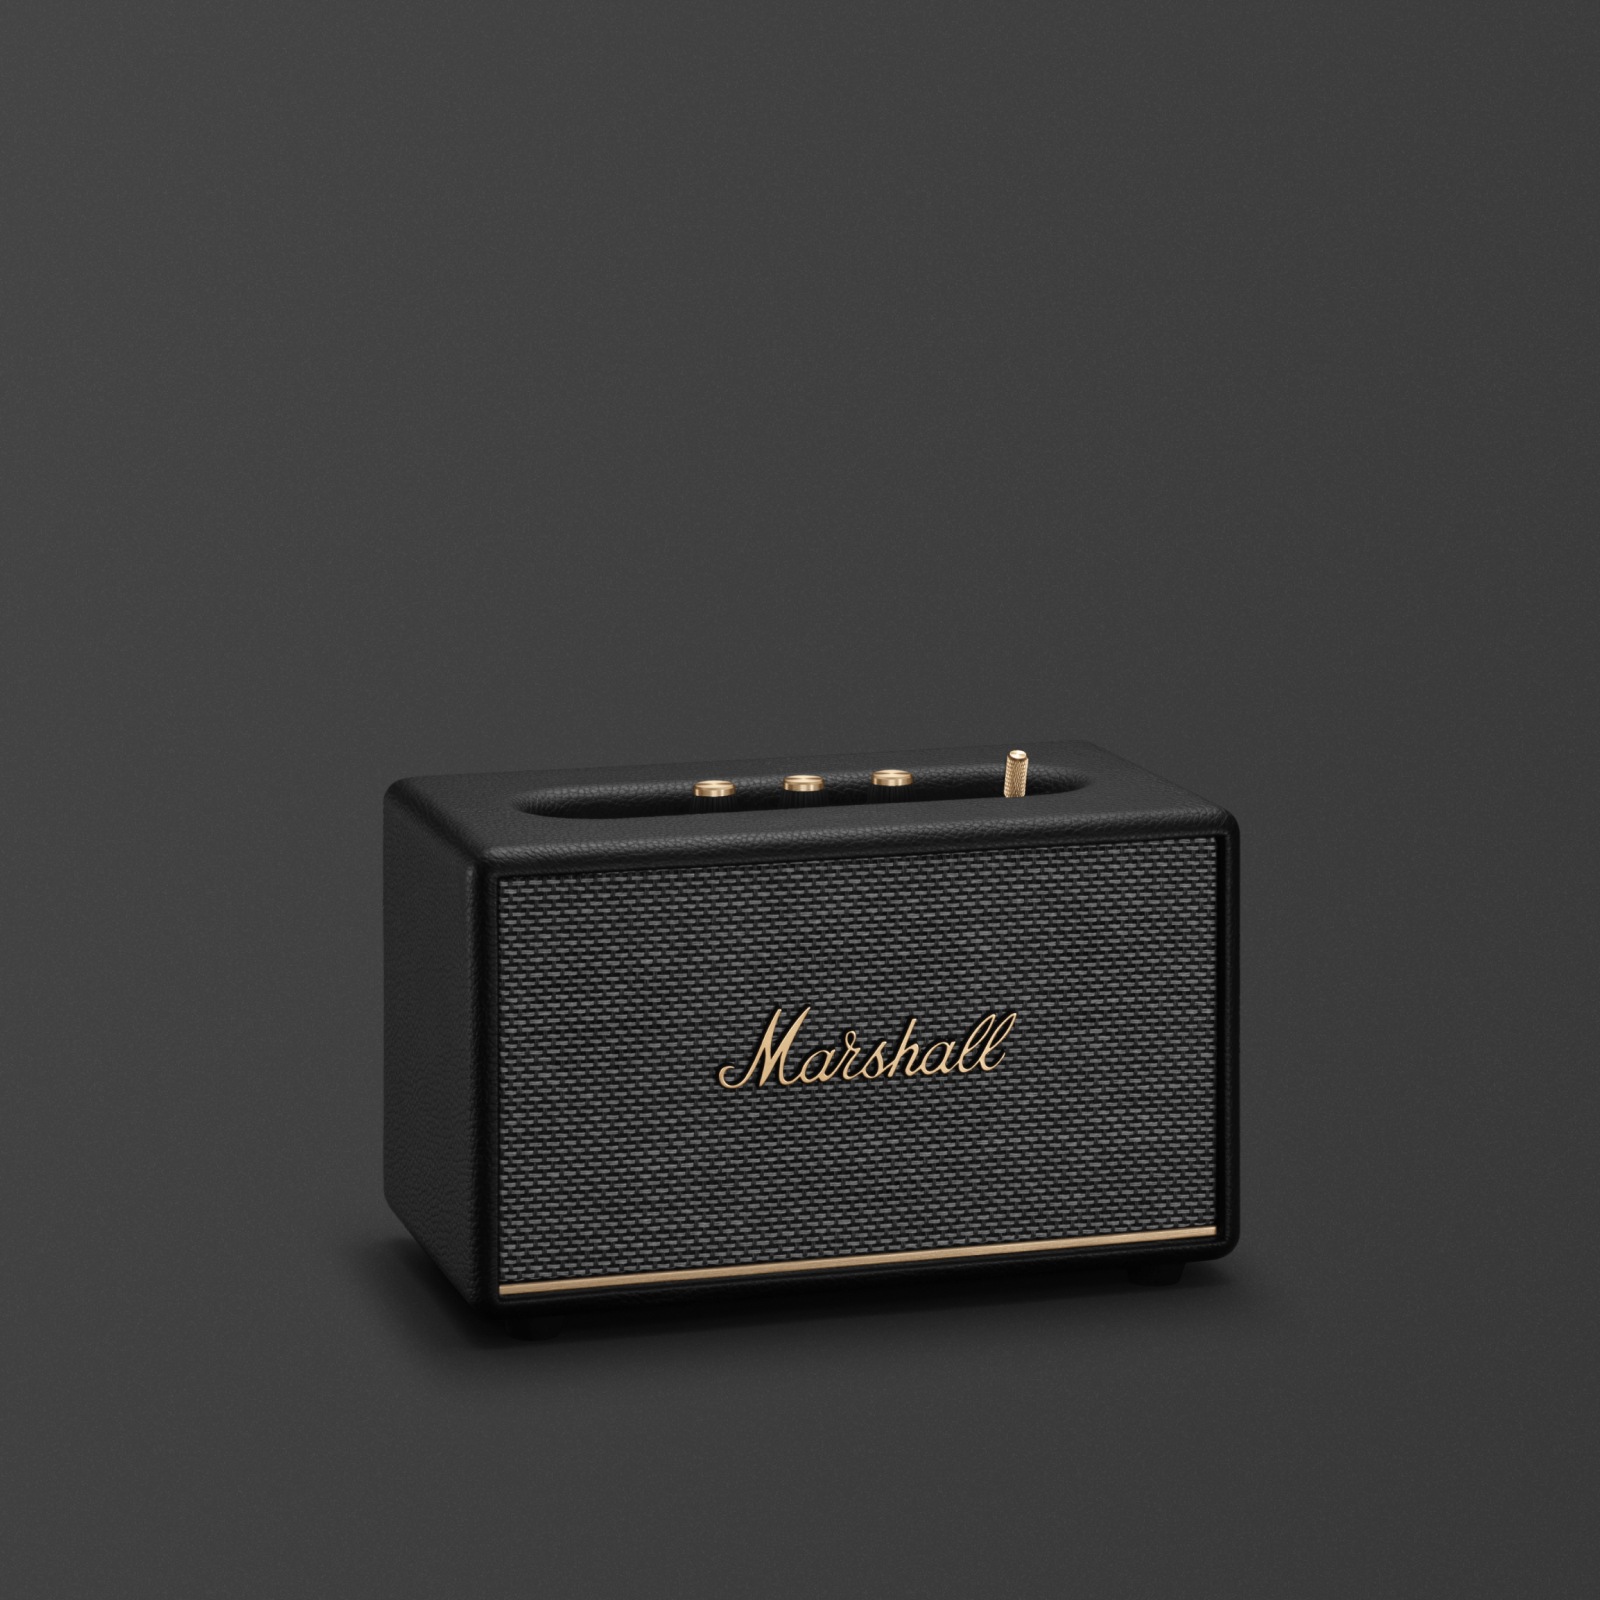 Marshall Acton III Bluetooth speaker in black and gold.